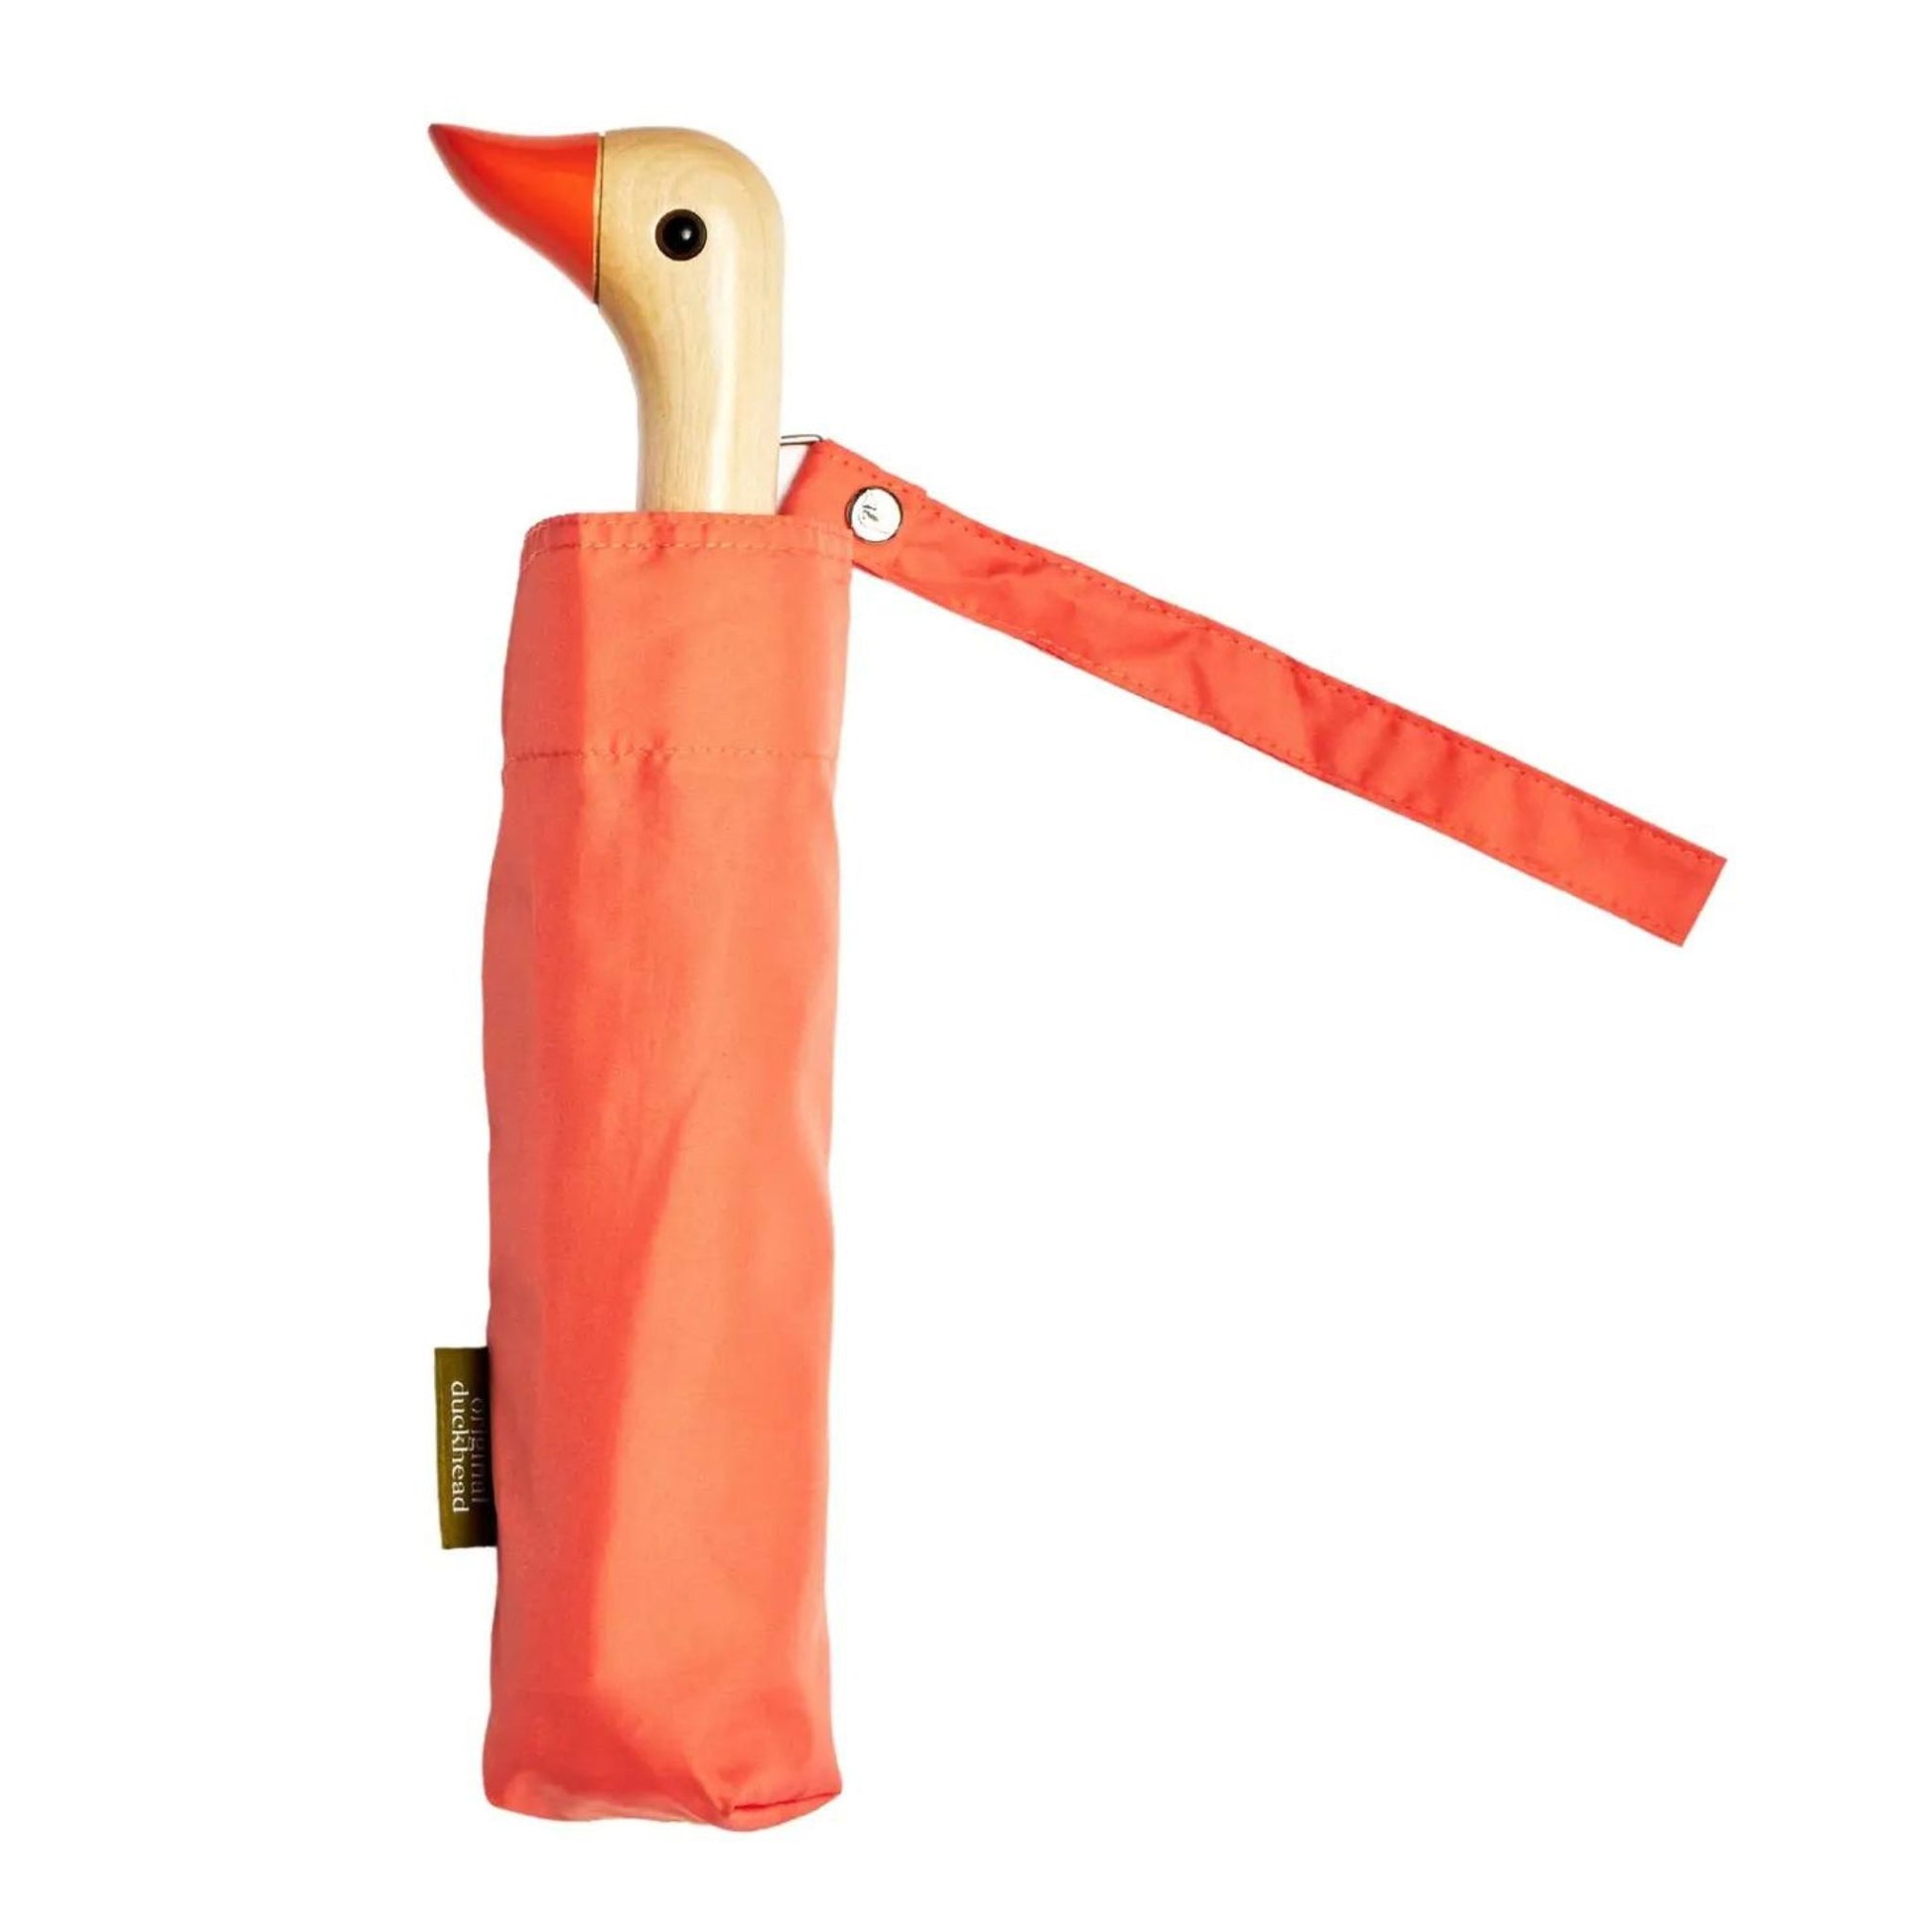 Compact umbrella in peach with birchwood handle in the shape of duck head